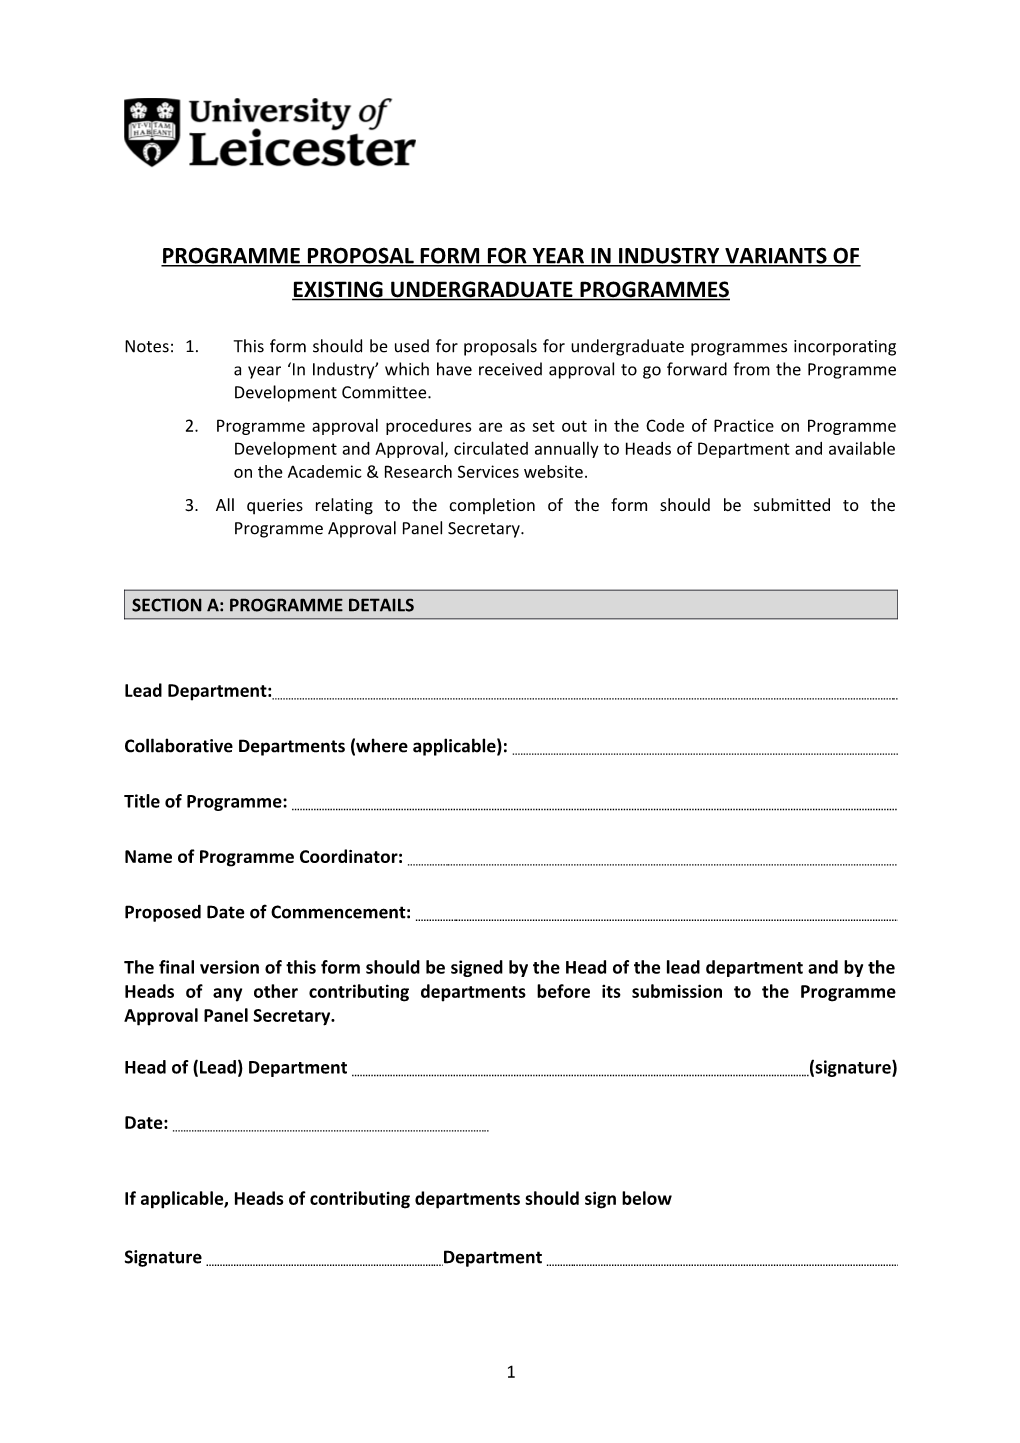 Programme Proposal Form for Year in Industry Variants of Existing Undergraduate Programmes